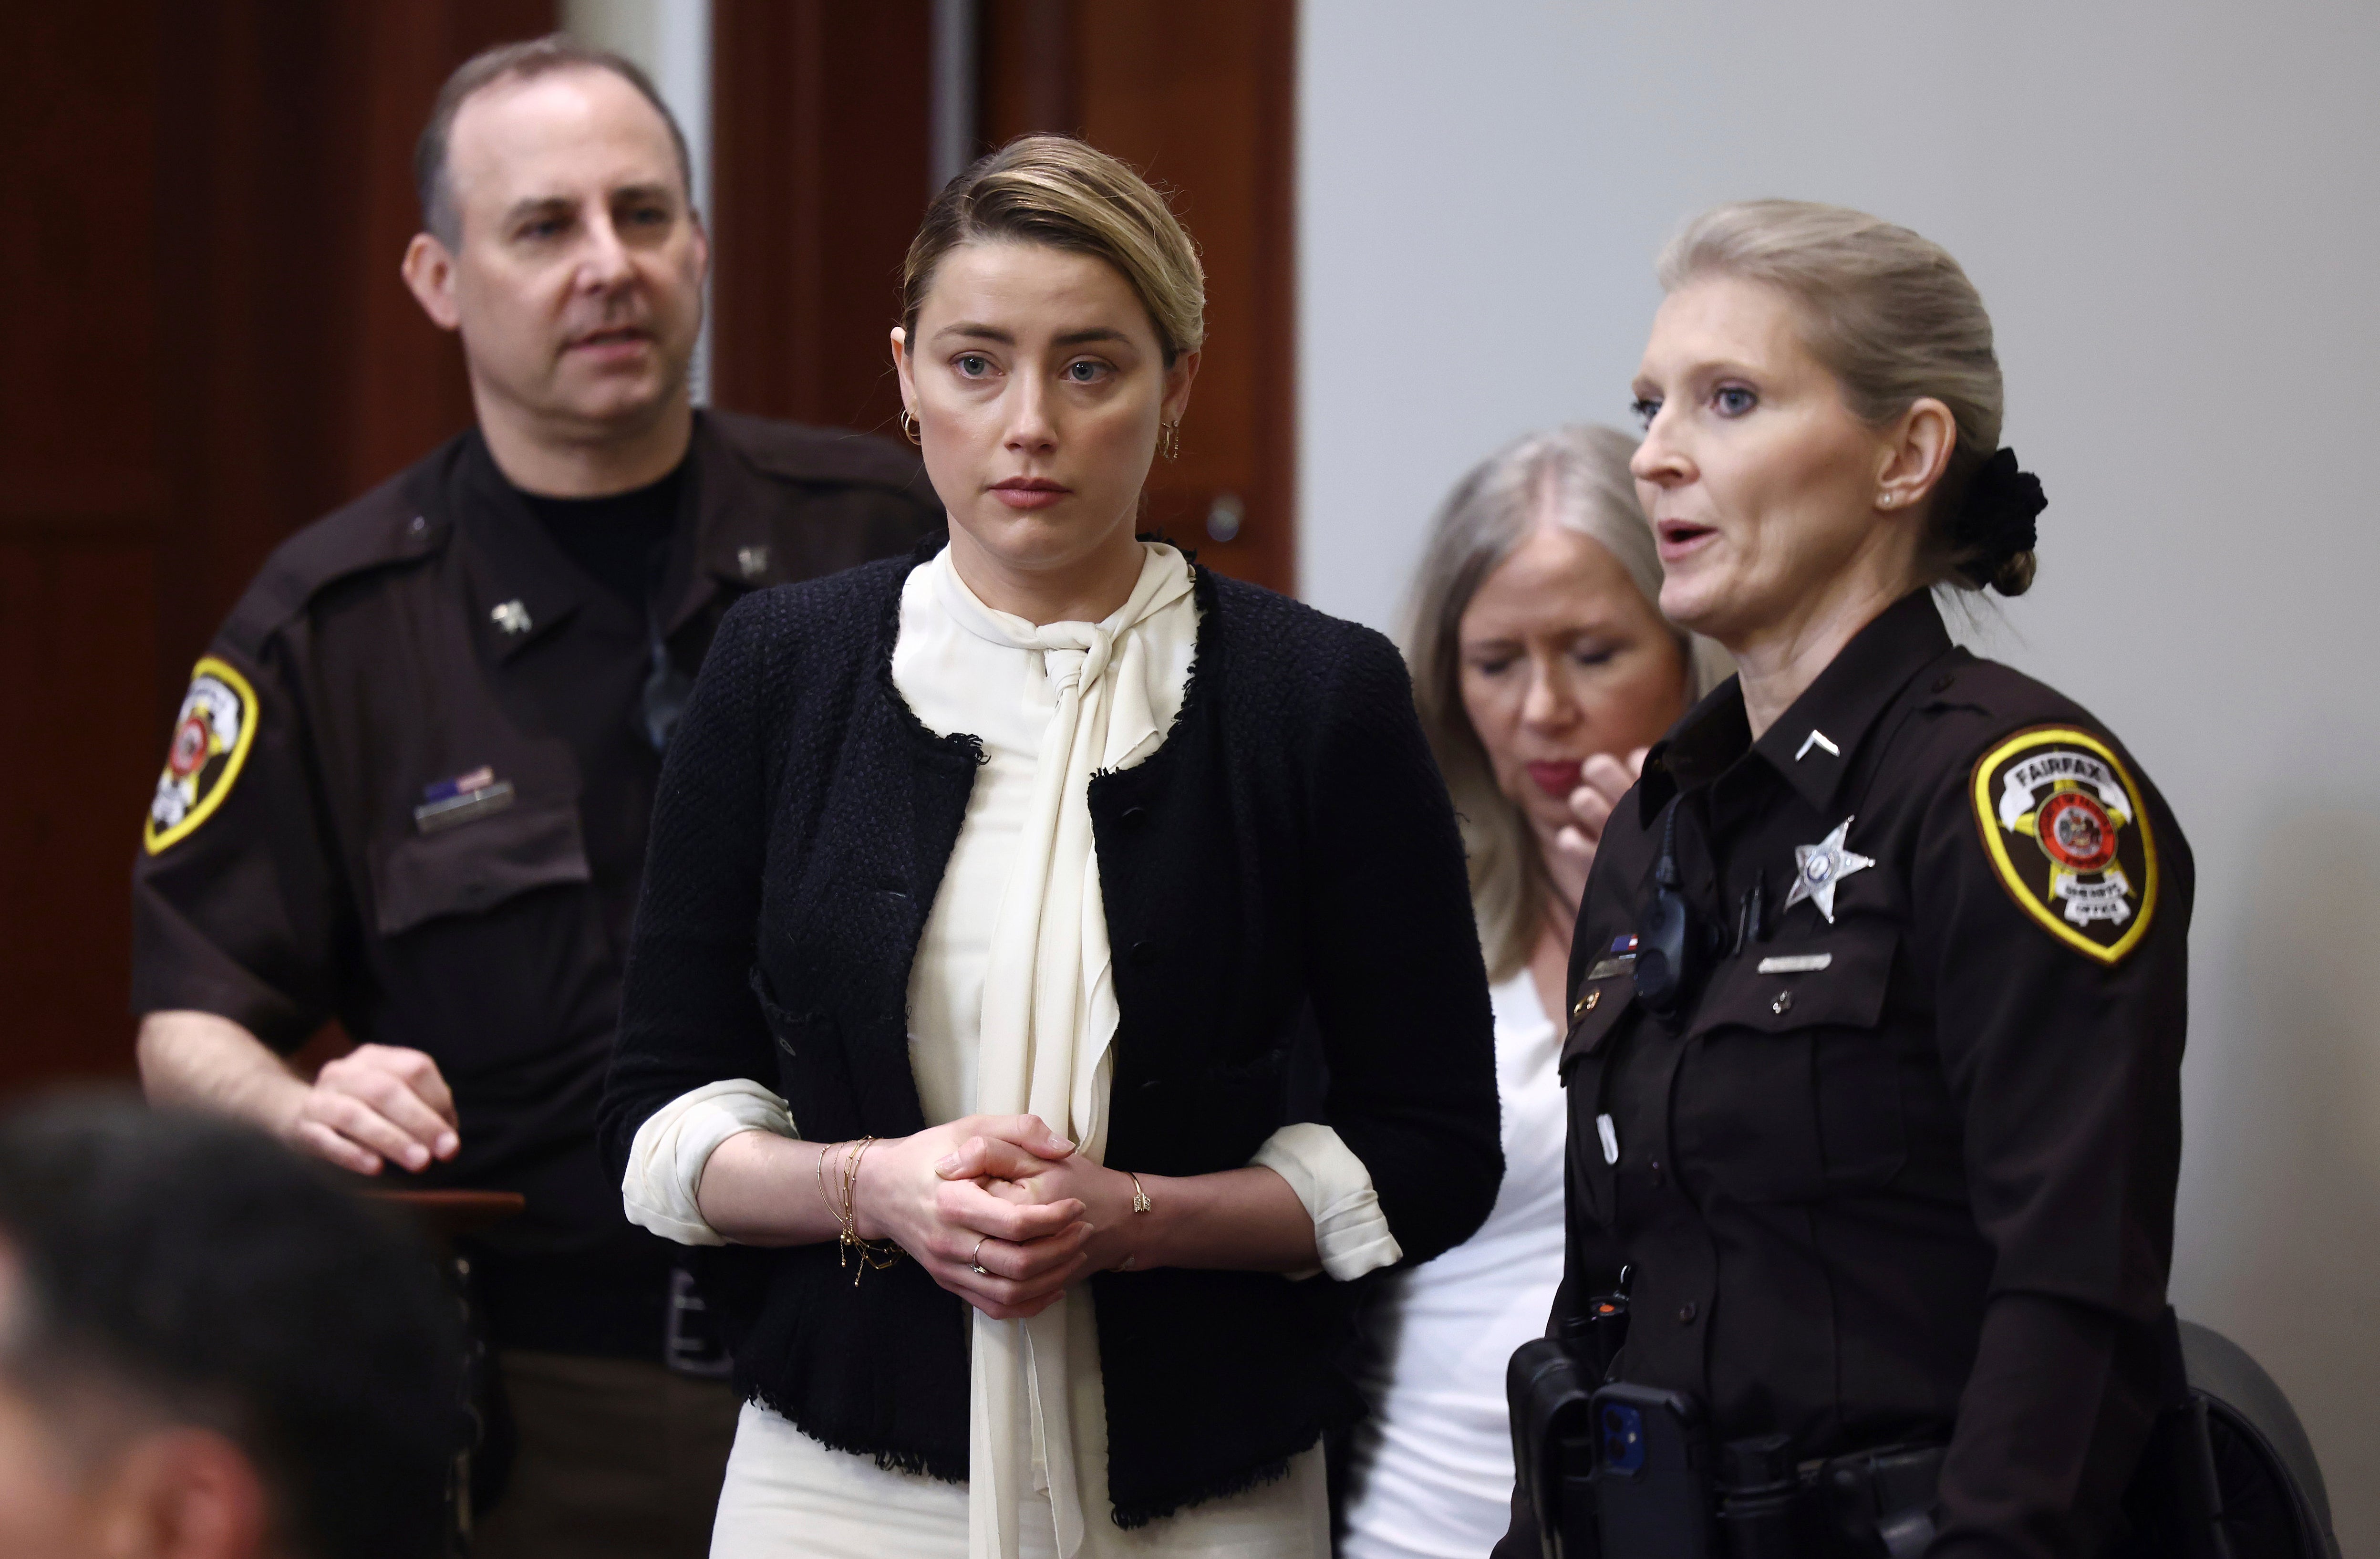 Mr Heard described how she was ‘constantly catering’ to his changing moods (Jim Lo Scalzo/AP)